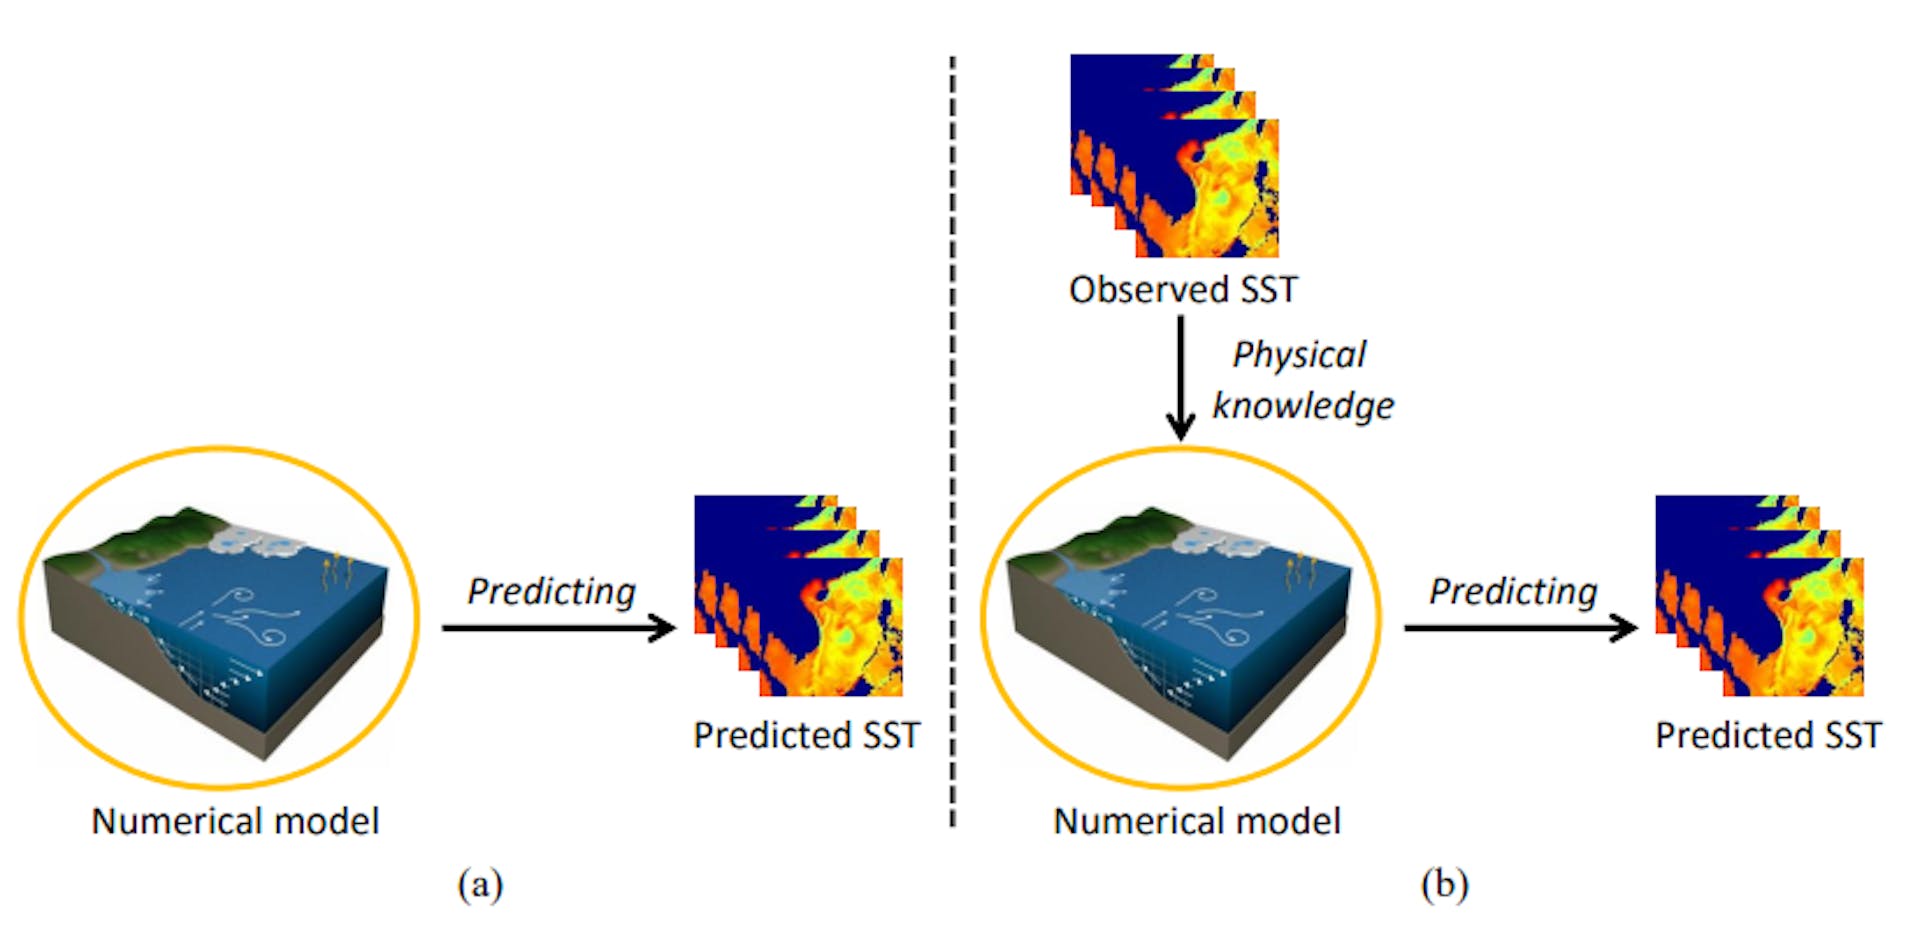 Fig. 1. Conceptual comparison of numerical model and the proposed method on sea surface temperature (SST) prediction. (a) Numerical model. (b) Proposed method for SST prediction. Generative adversarial network is used to transfer the physical knowledge from the historical observed data to the numerical model, and therefore improved the SST prediction performance.